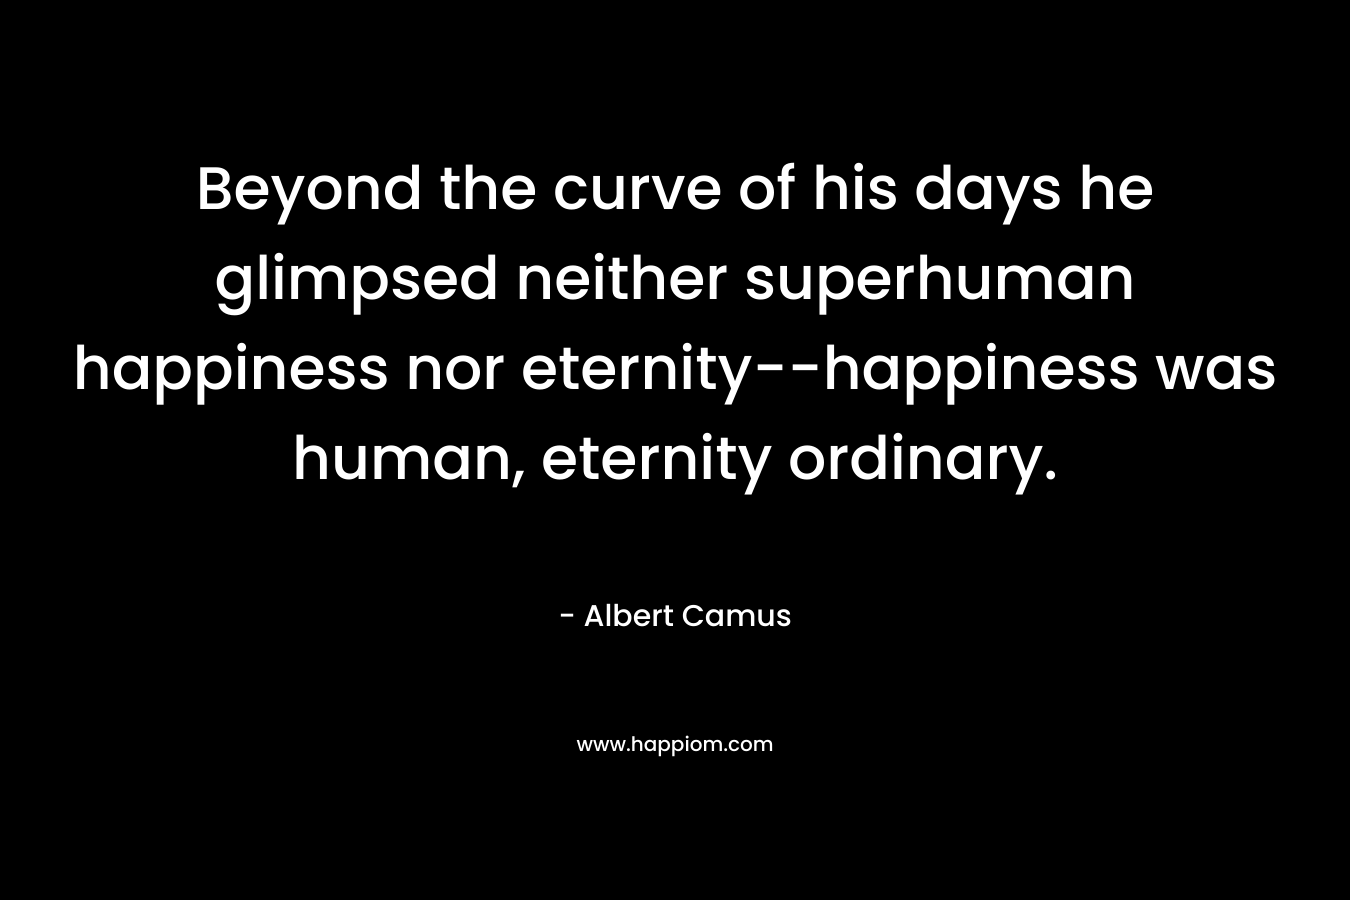 Beyond the curve of his days he glimpsed neither superhuman happiness nor eternity–happiness was human, eternity ordinary. – Albert Camus